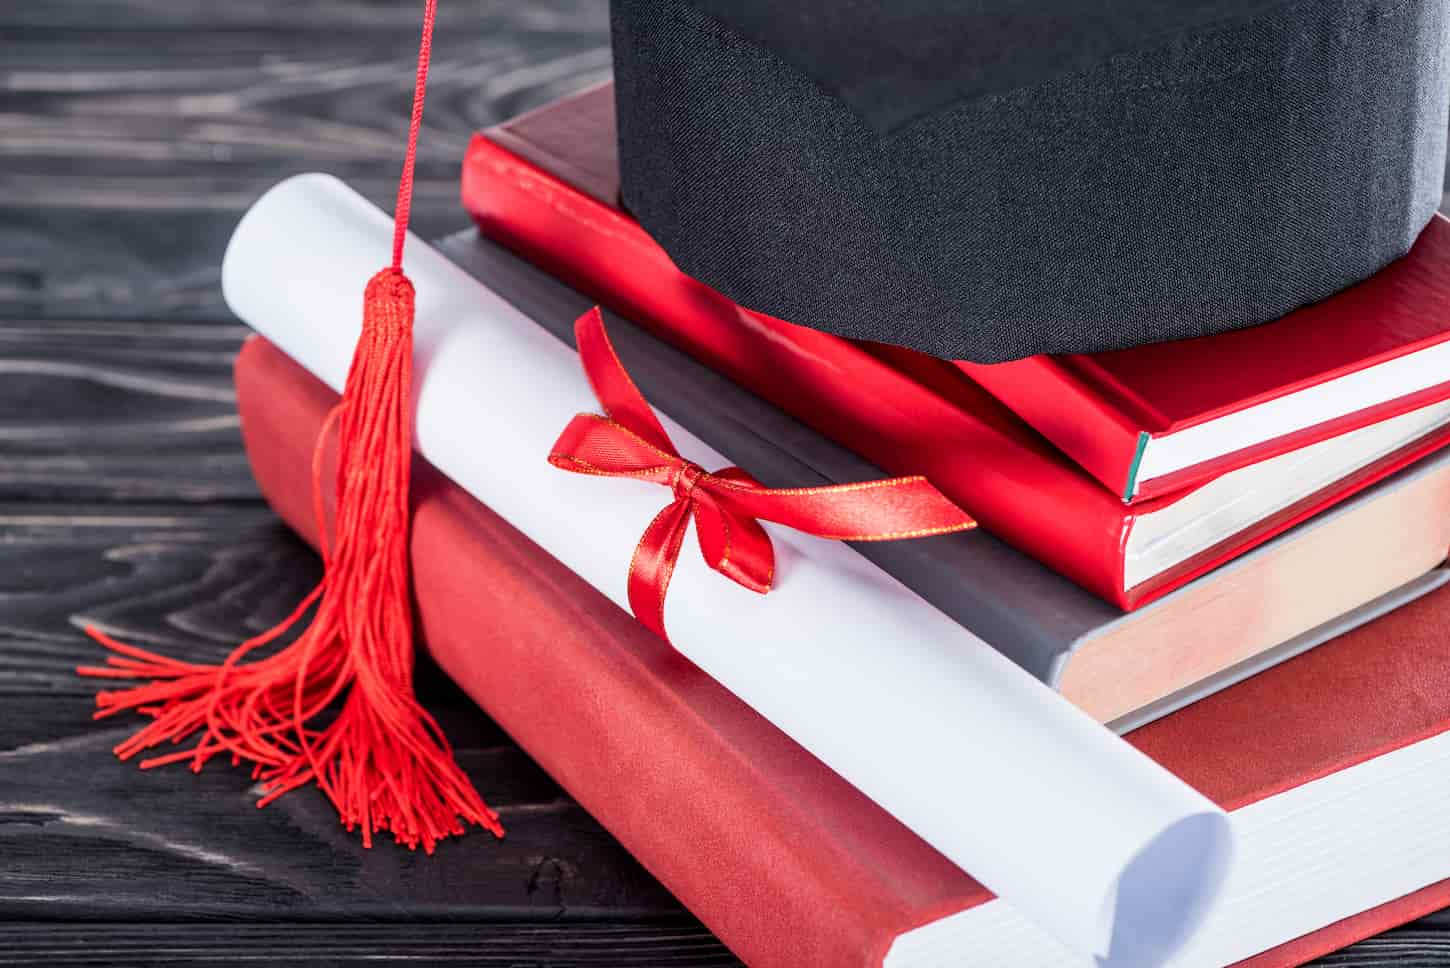 An image of the Graduation concept diploma and graduation cap on stack of books.